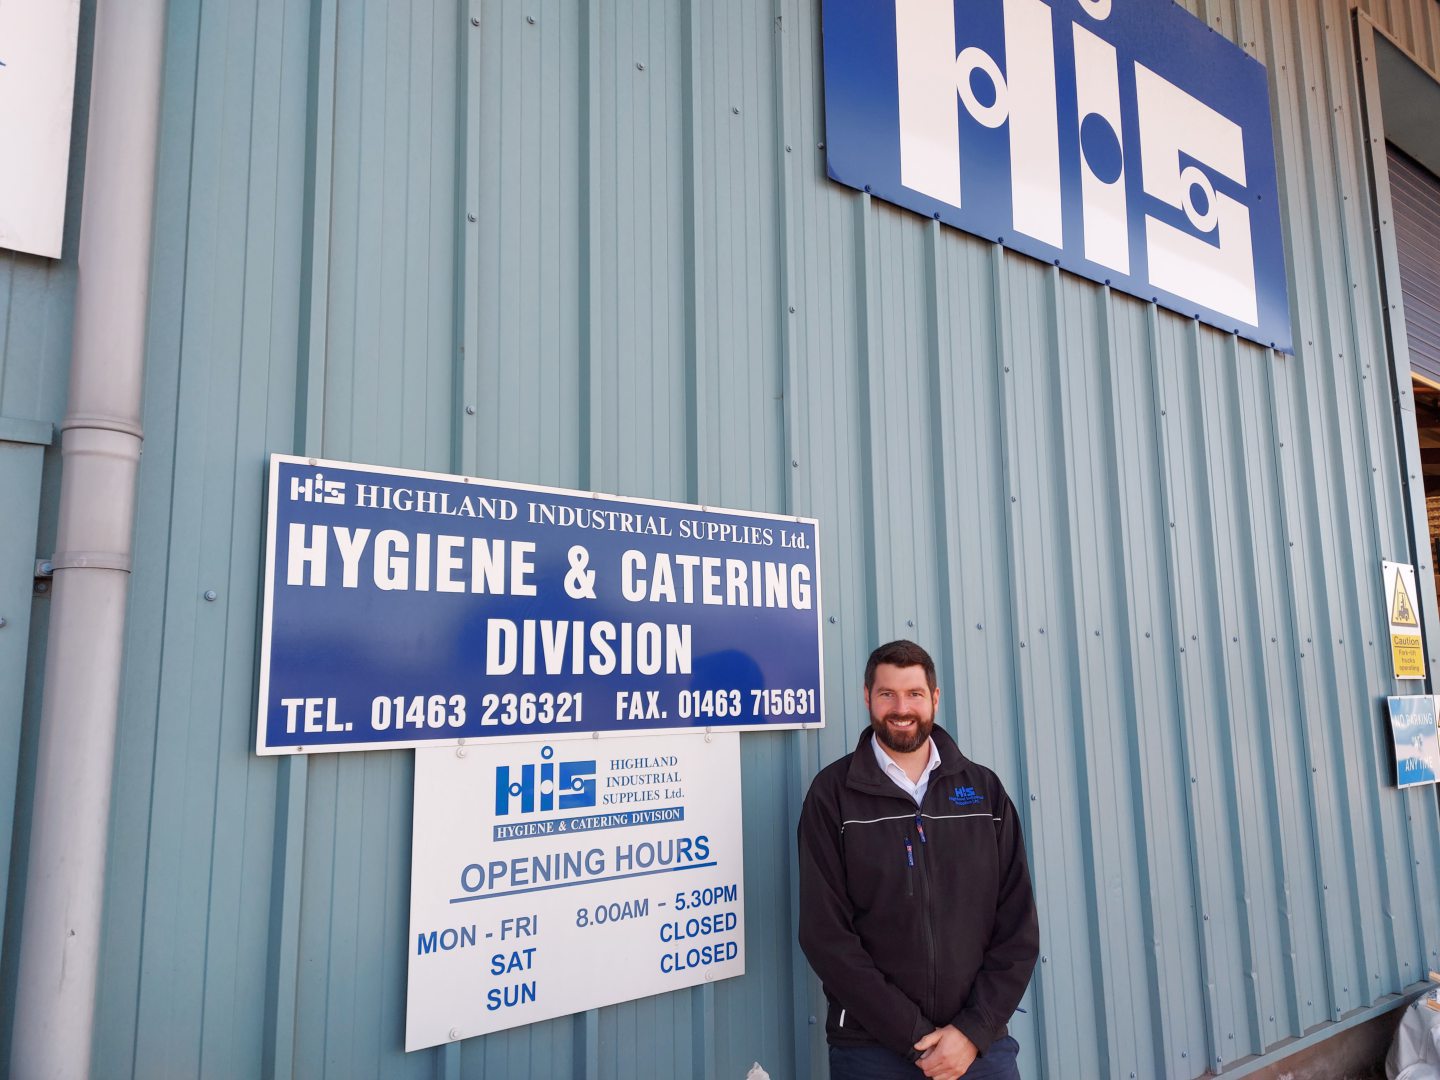 Craig Nicholson. general manager of Highland Industrial Supplies' hygiene and catering division